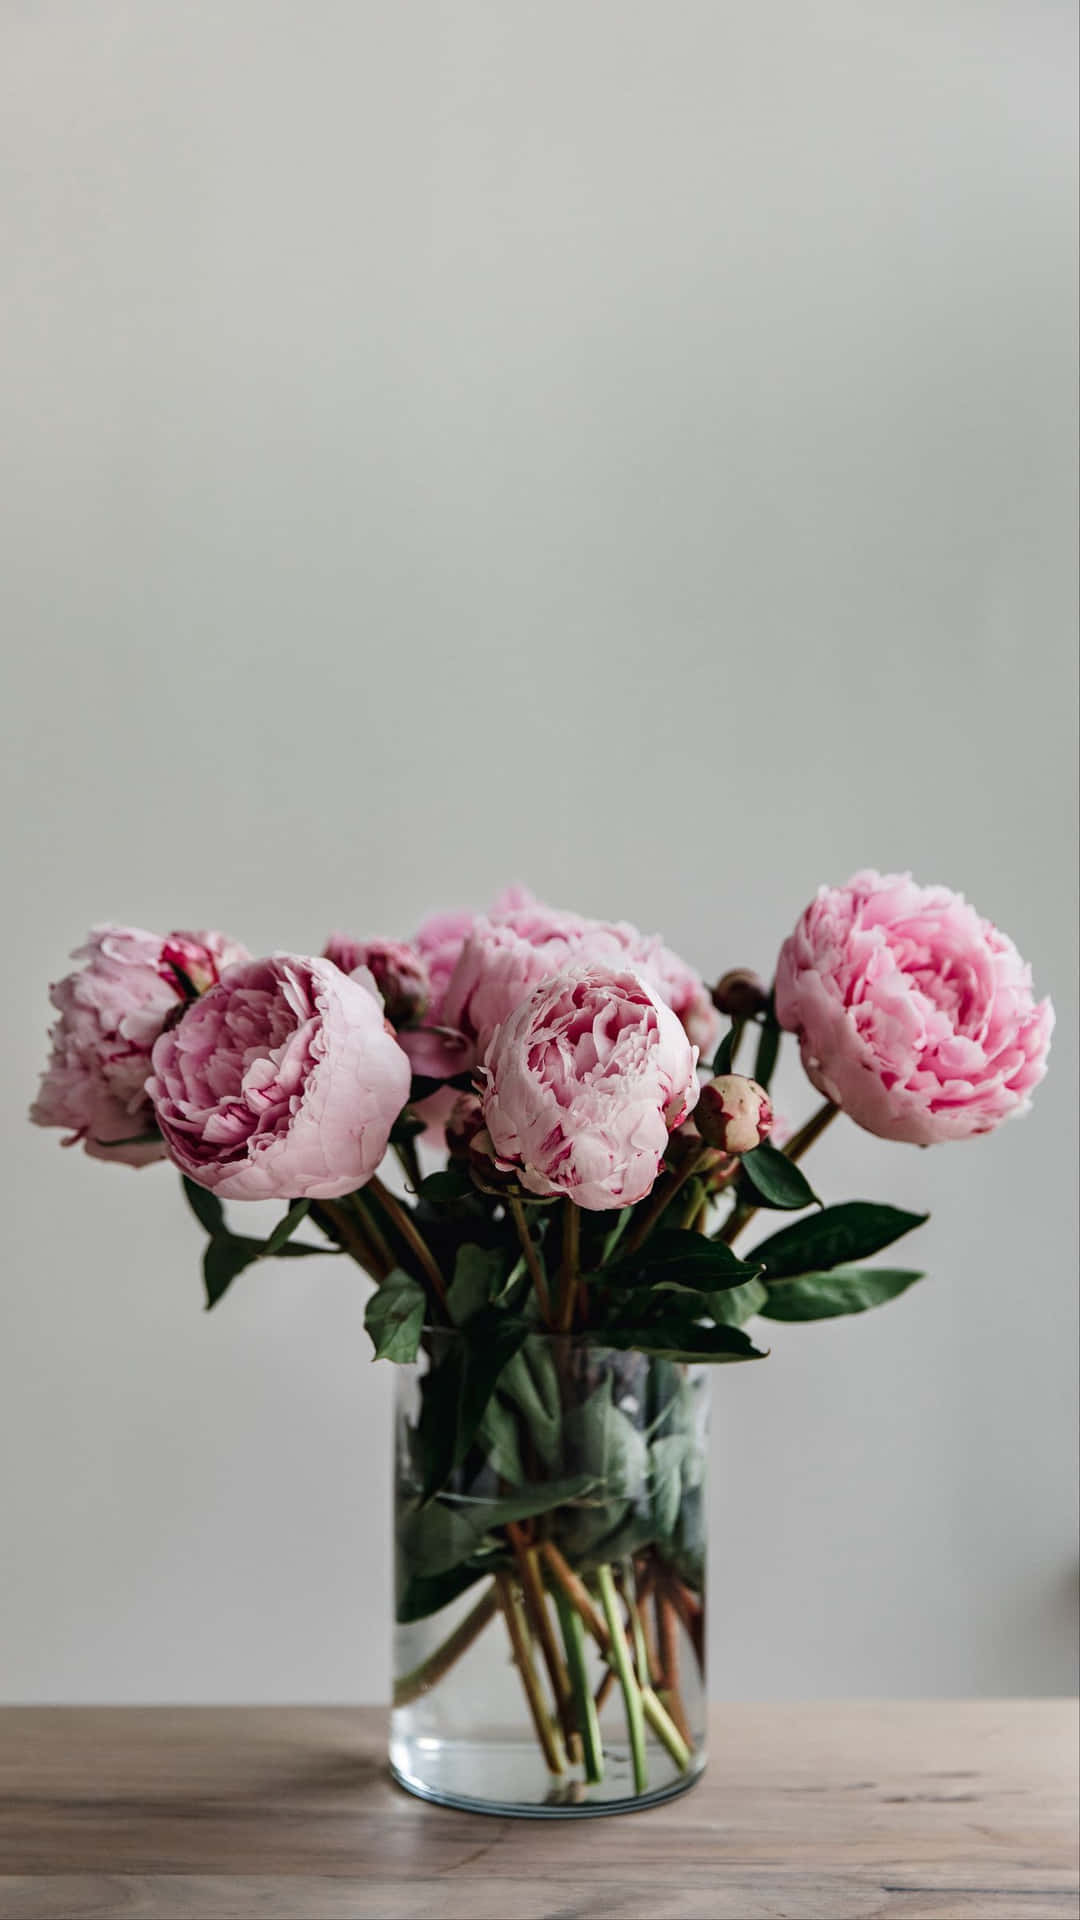 Enjoy the beauty of nature on your phone with the Peony iPhone wallpaper. Wallpaper